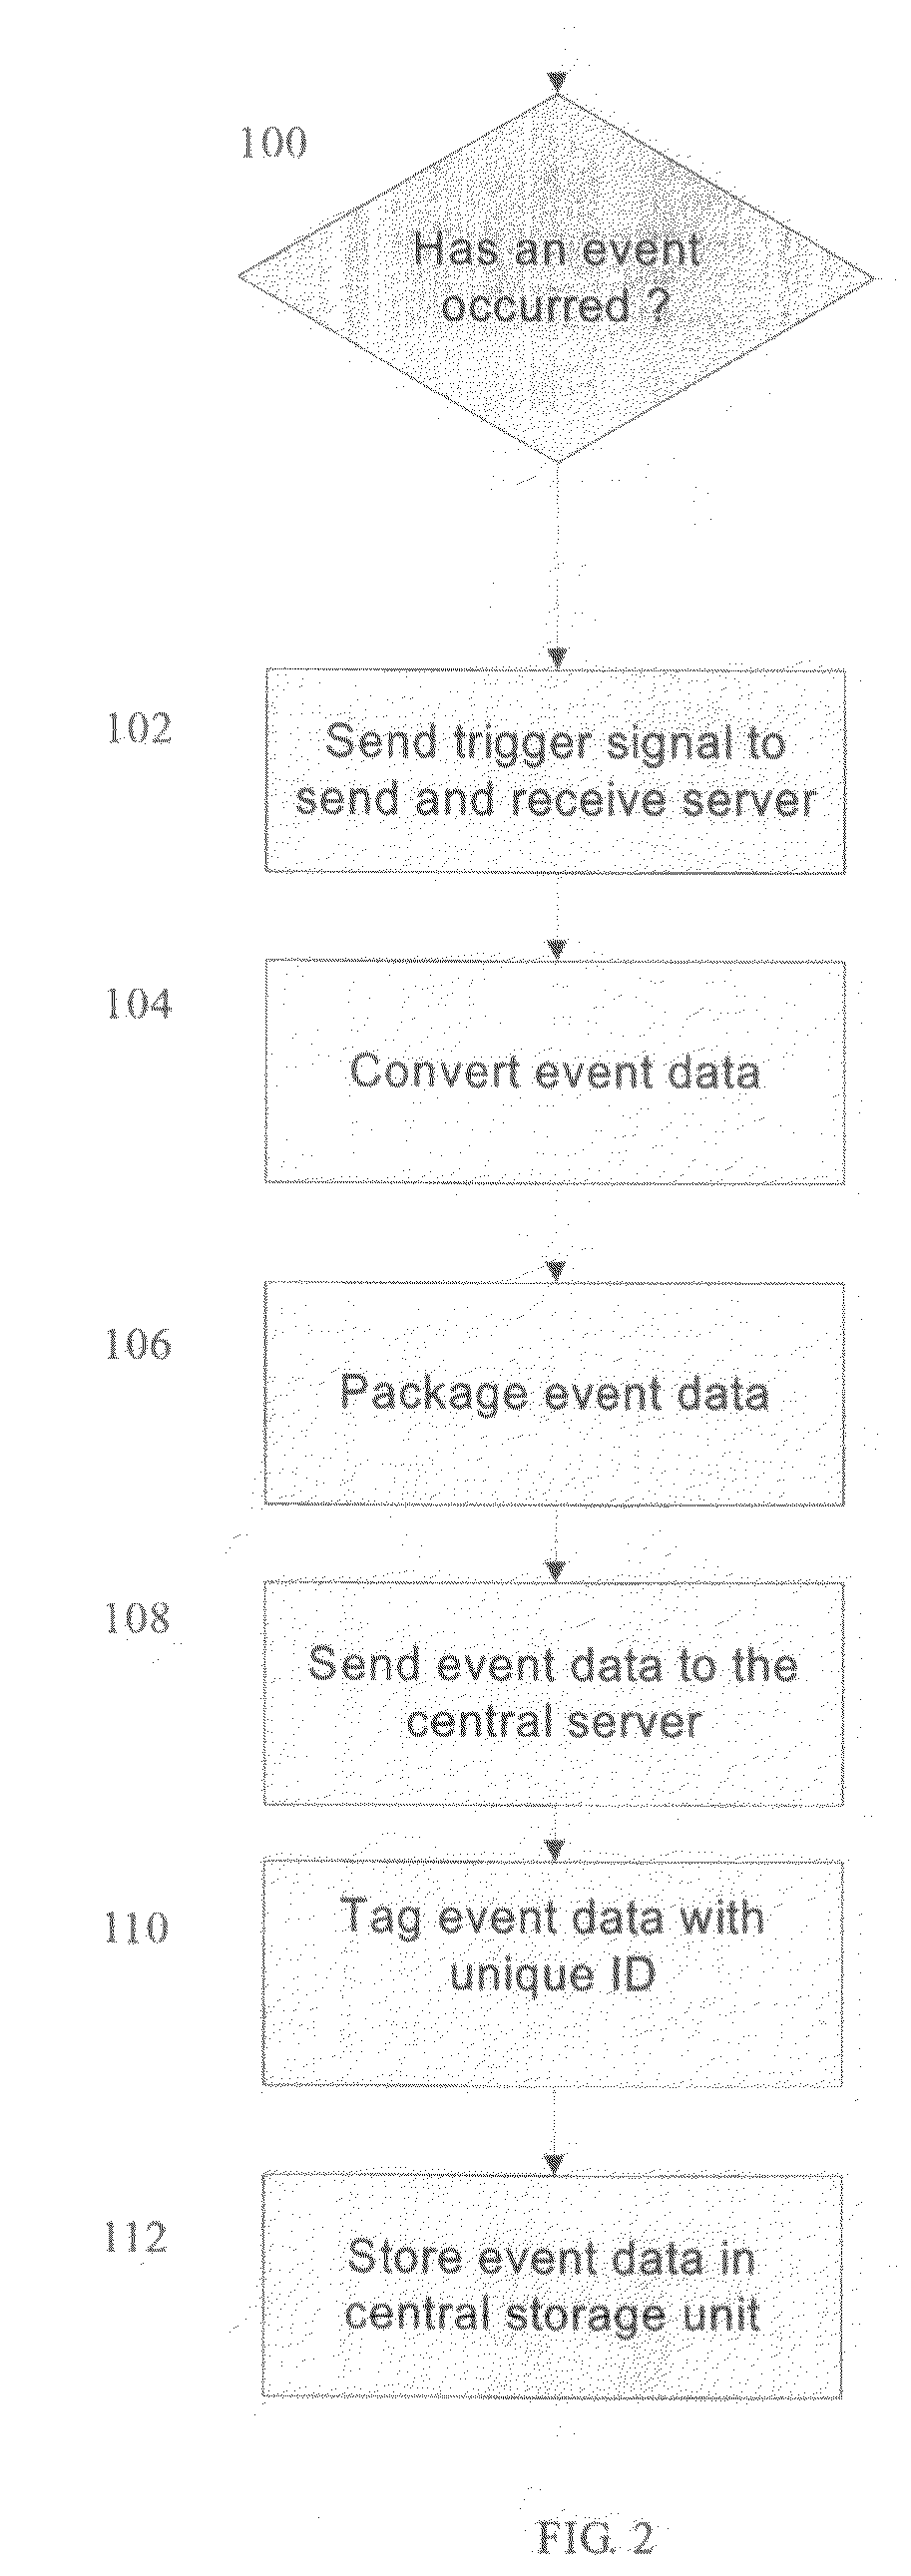 Method and system for sharing data between radiology information systems